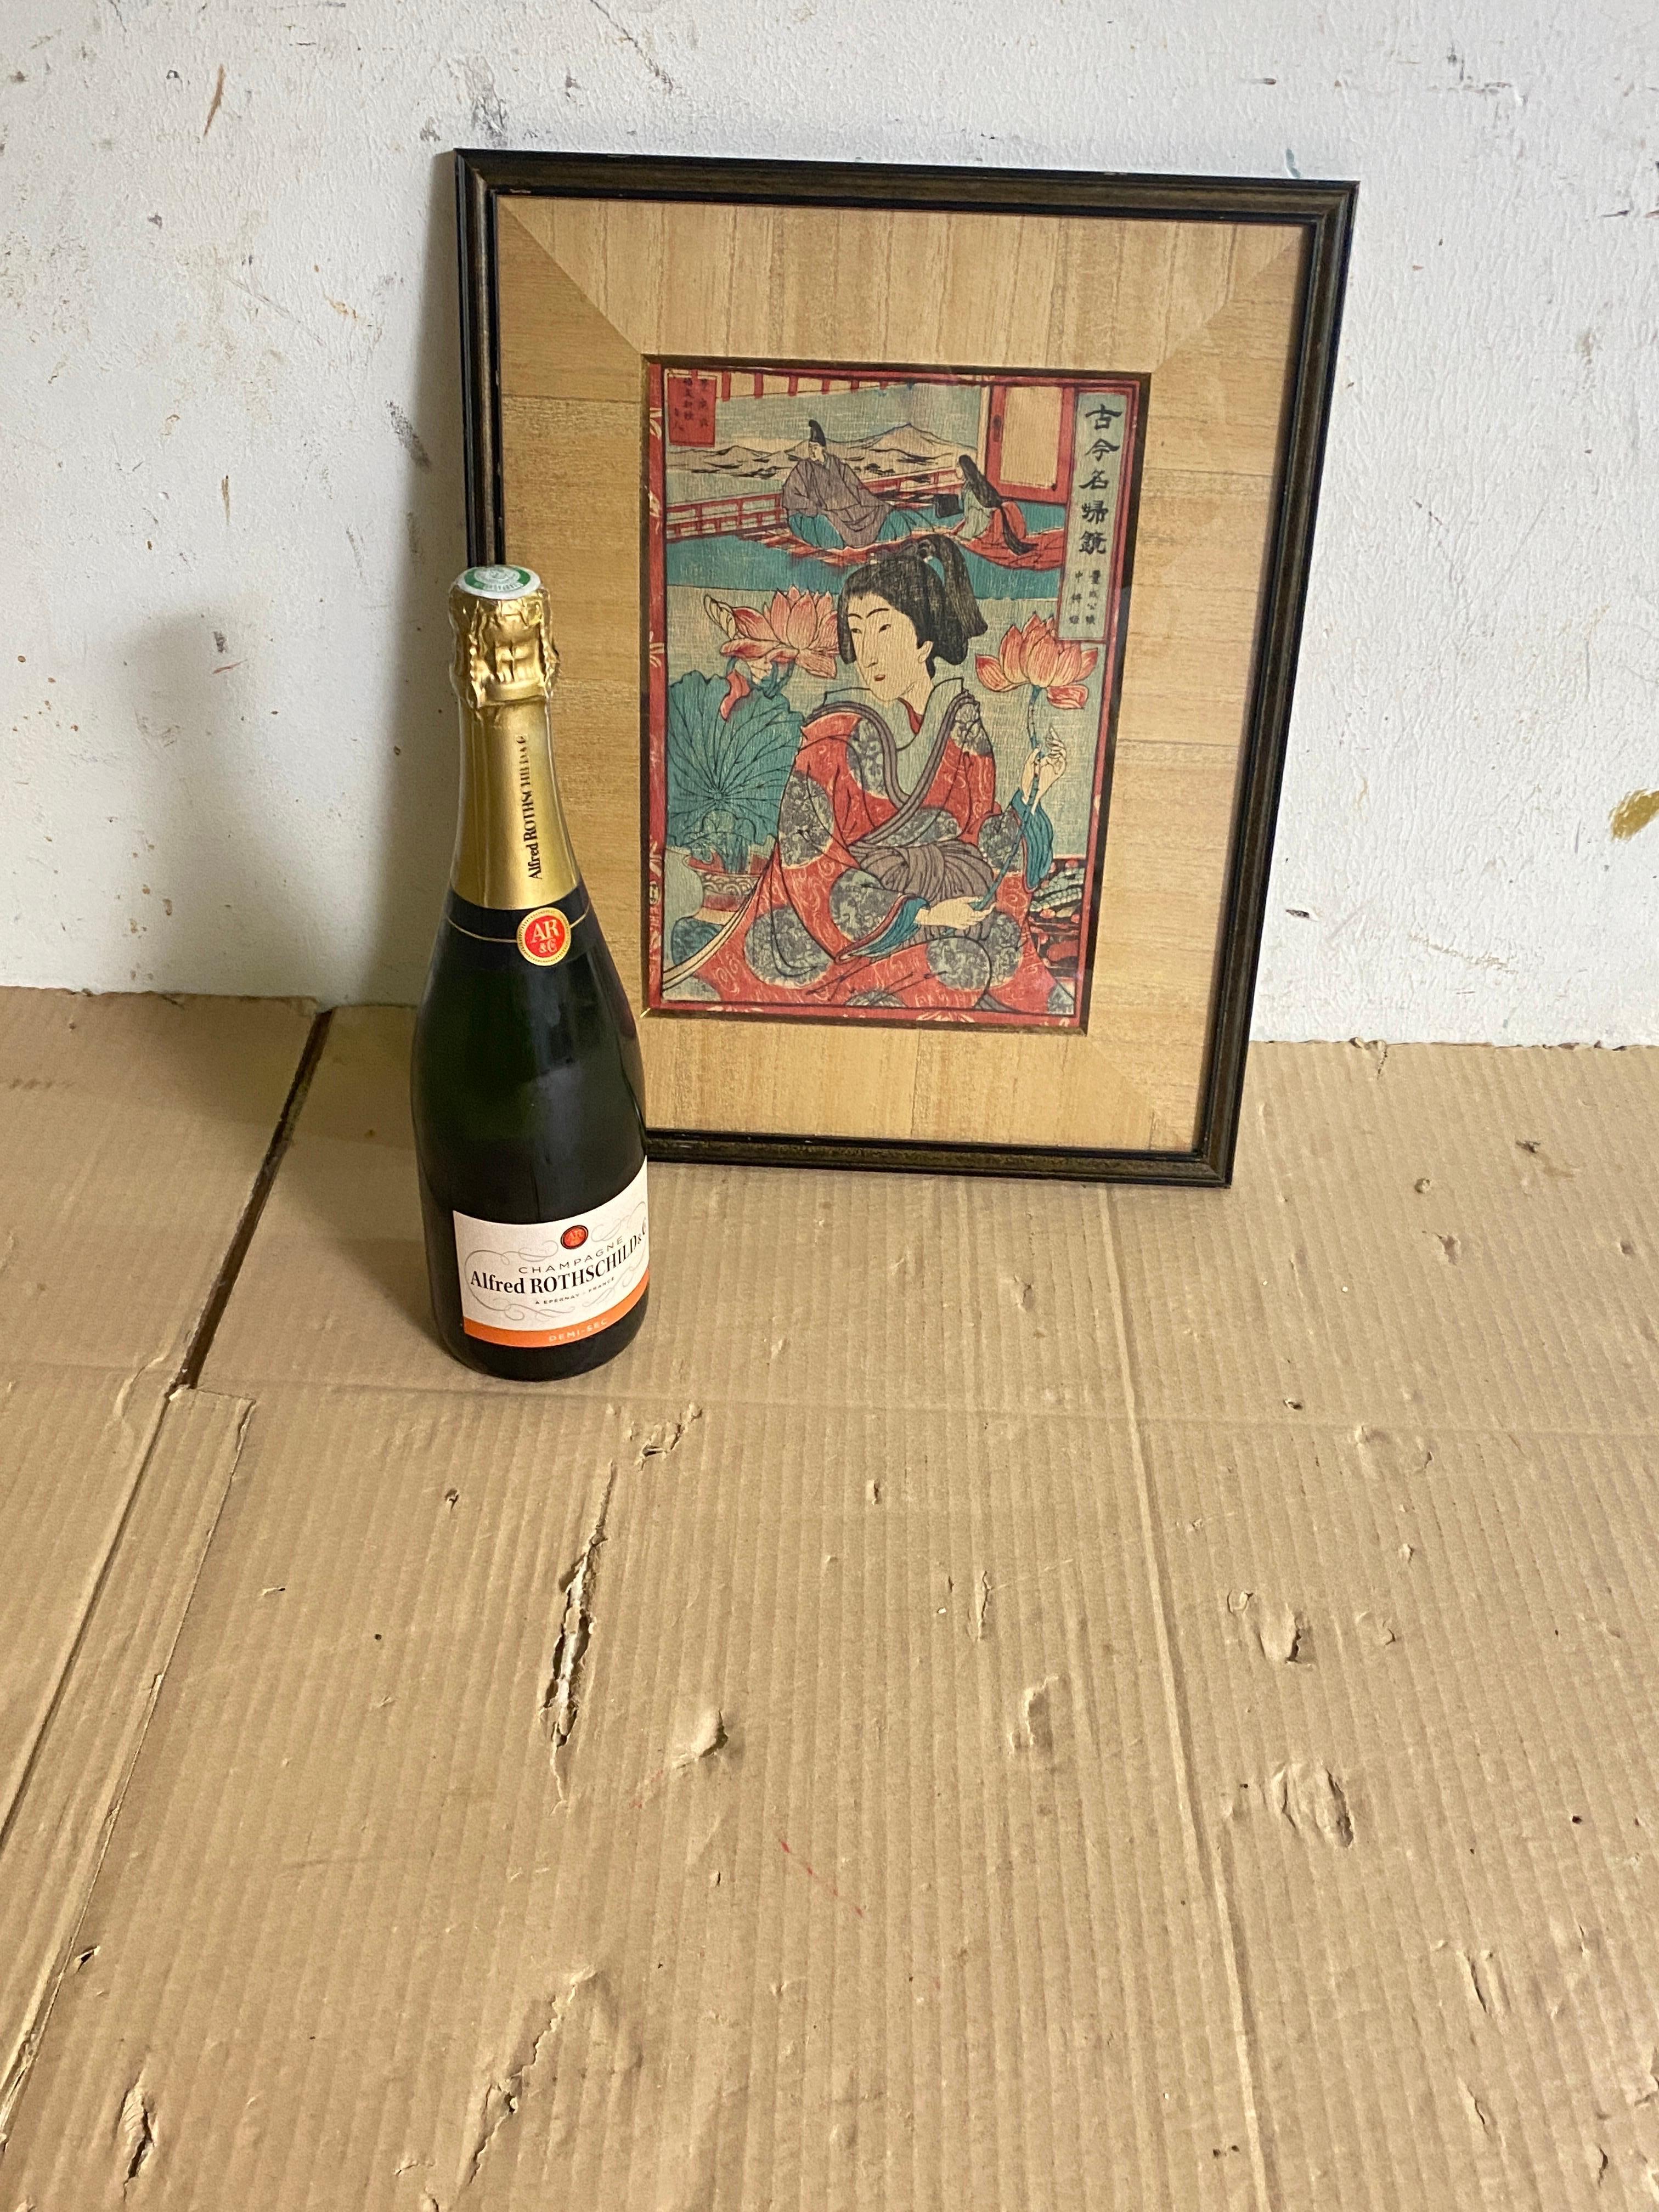 Rare, original  19th century woodblock print. Beautiful Edo period print from the original publisher. Quality framed with conservation glass in an black painted frame. 
Red Blue Green Colors.
